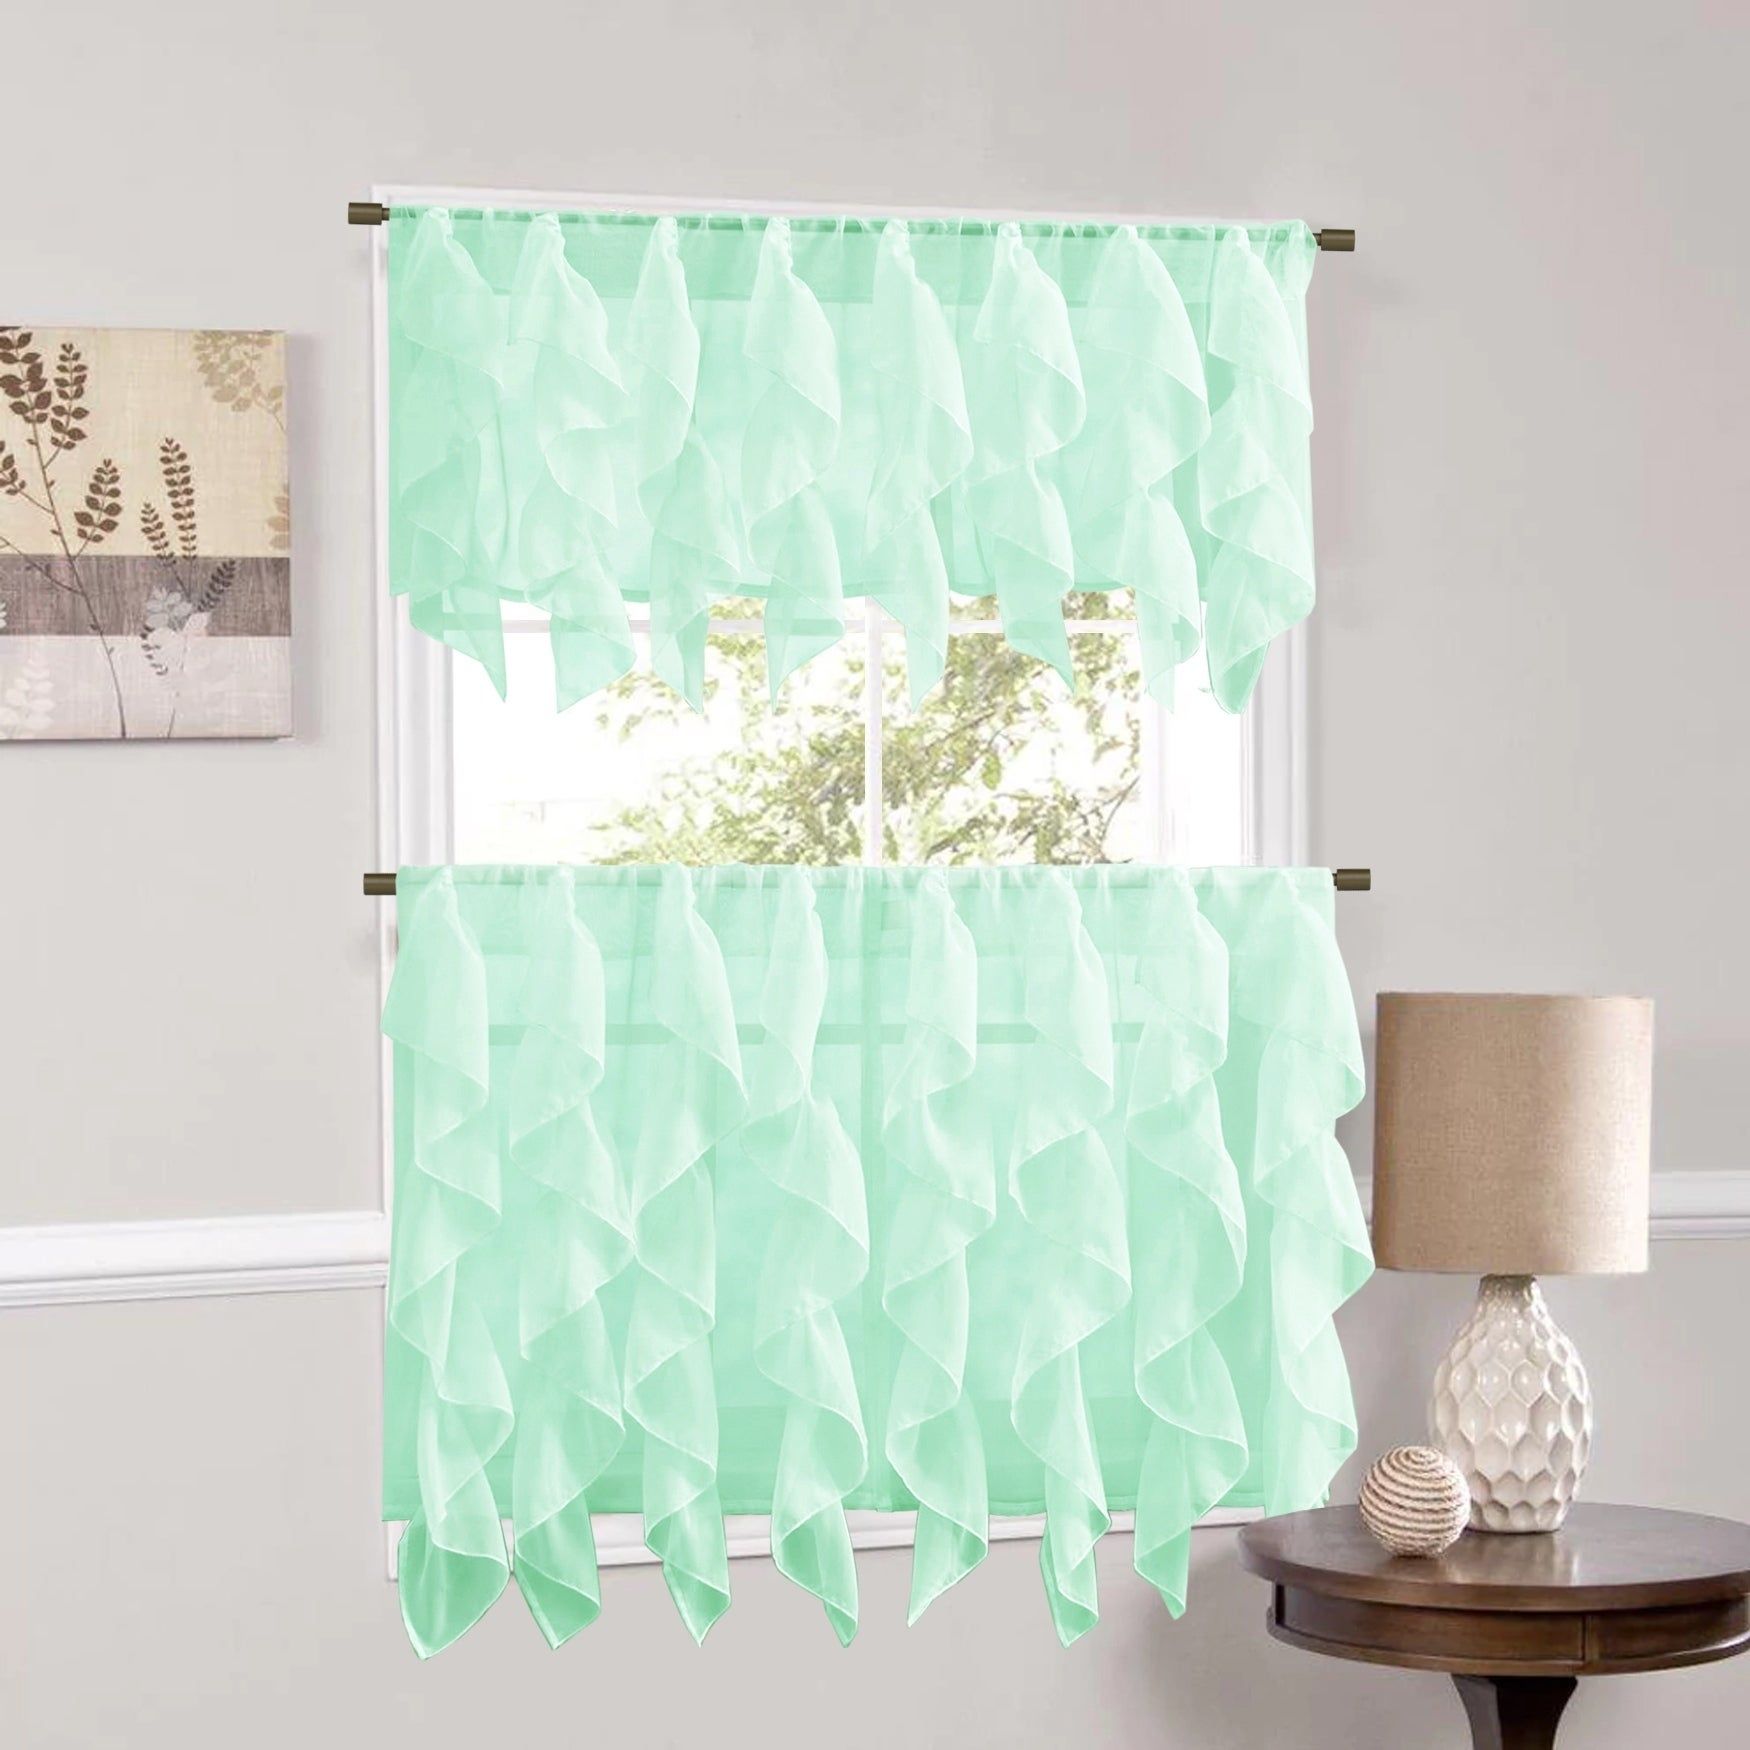 Sweet Home Collection Mint Vertical Ruffled Waterfall Valance And Curtain  Tiers Intended For Navy Vertical Ruffled Waterfall Valance And Curtain Tiers (View 4 of 20)